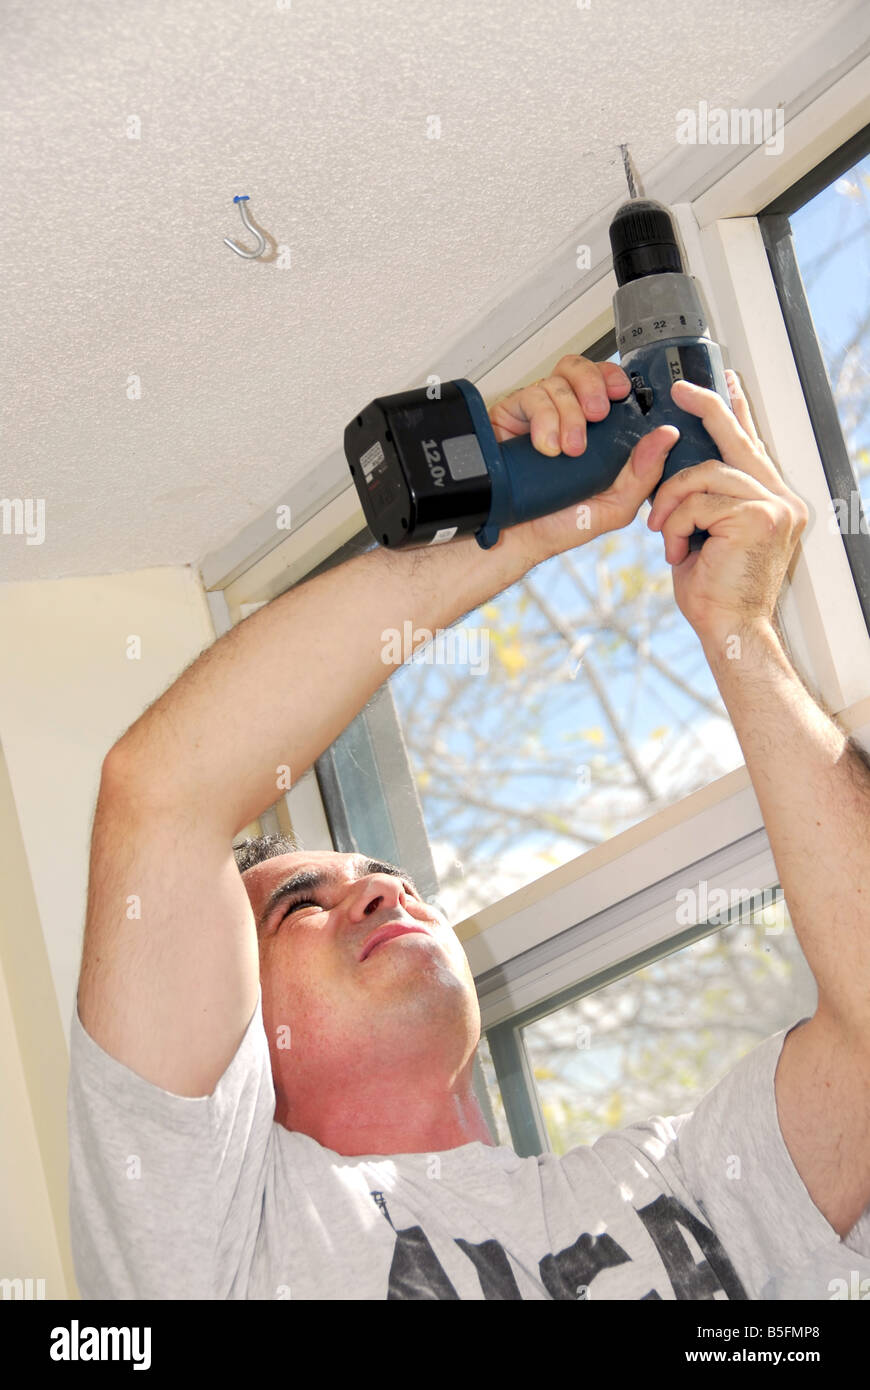 Man drilling a hole in a ceiling Stock Photo